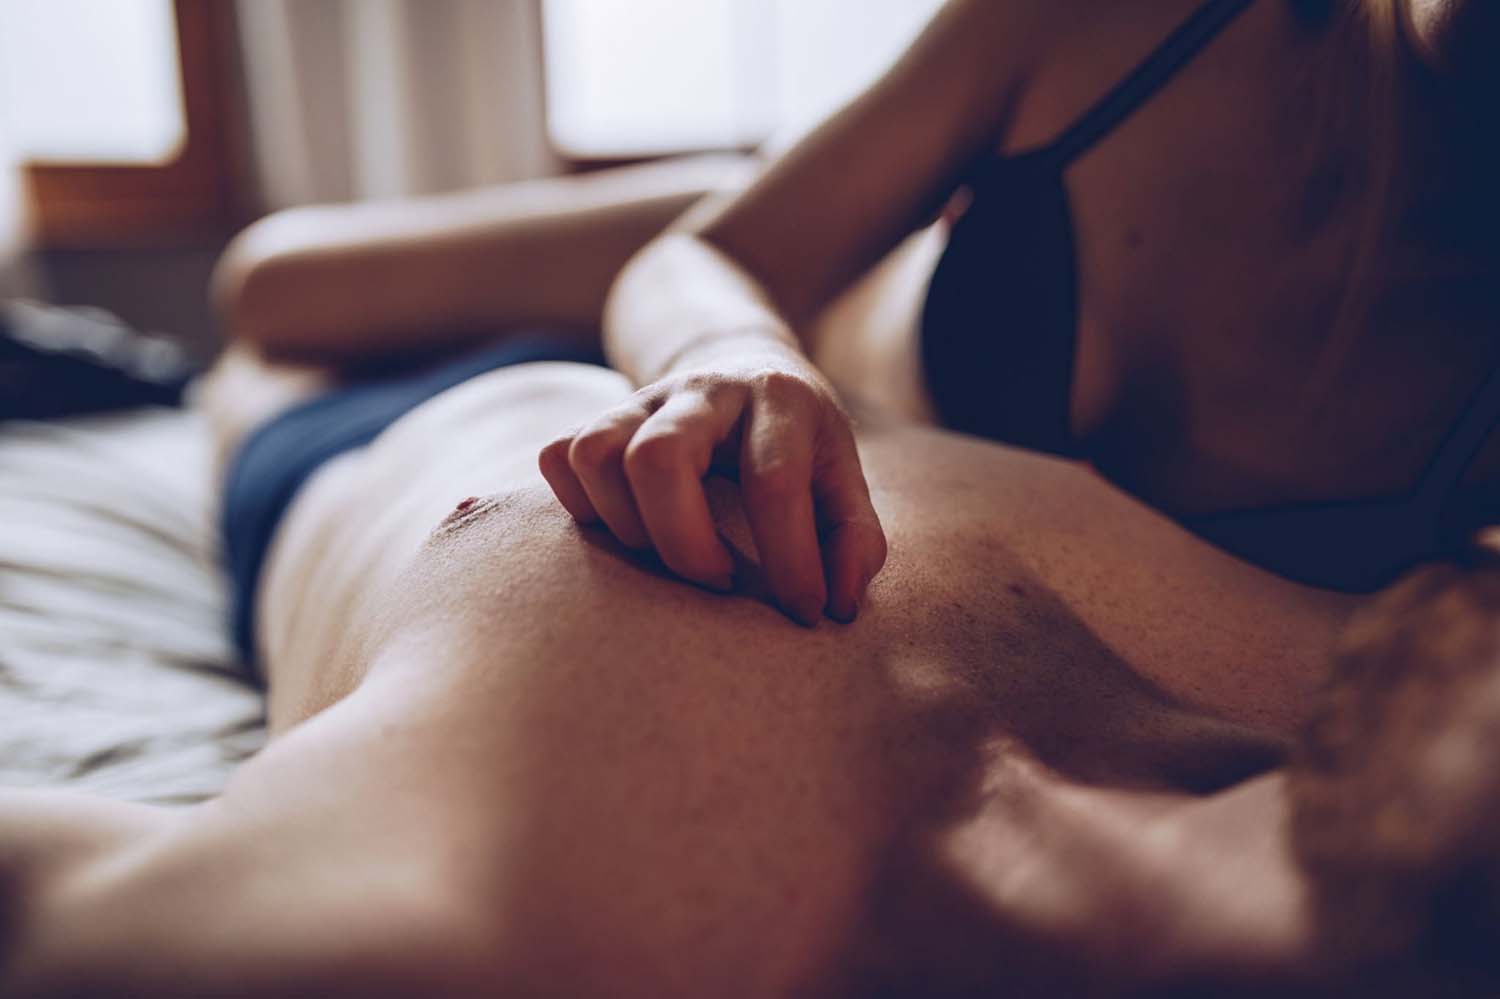 Foreplay Tips That Will Make Her Go Crazy in Bed